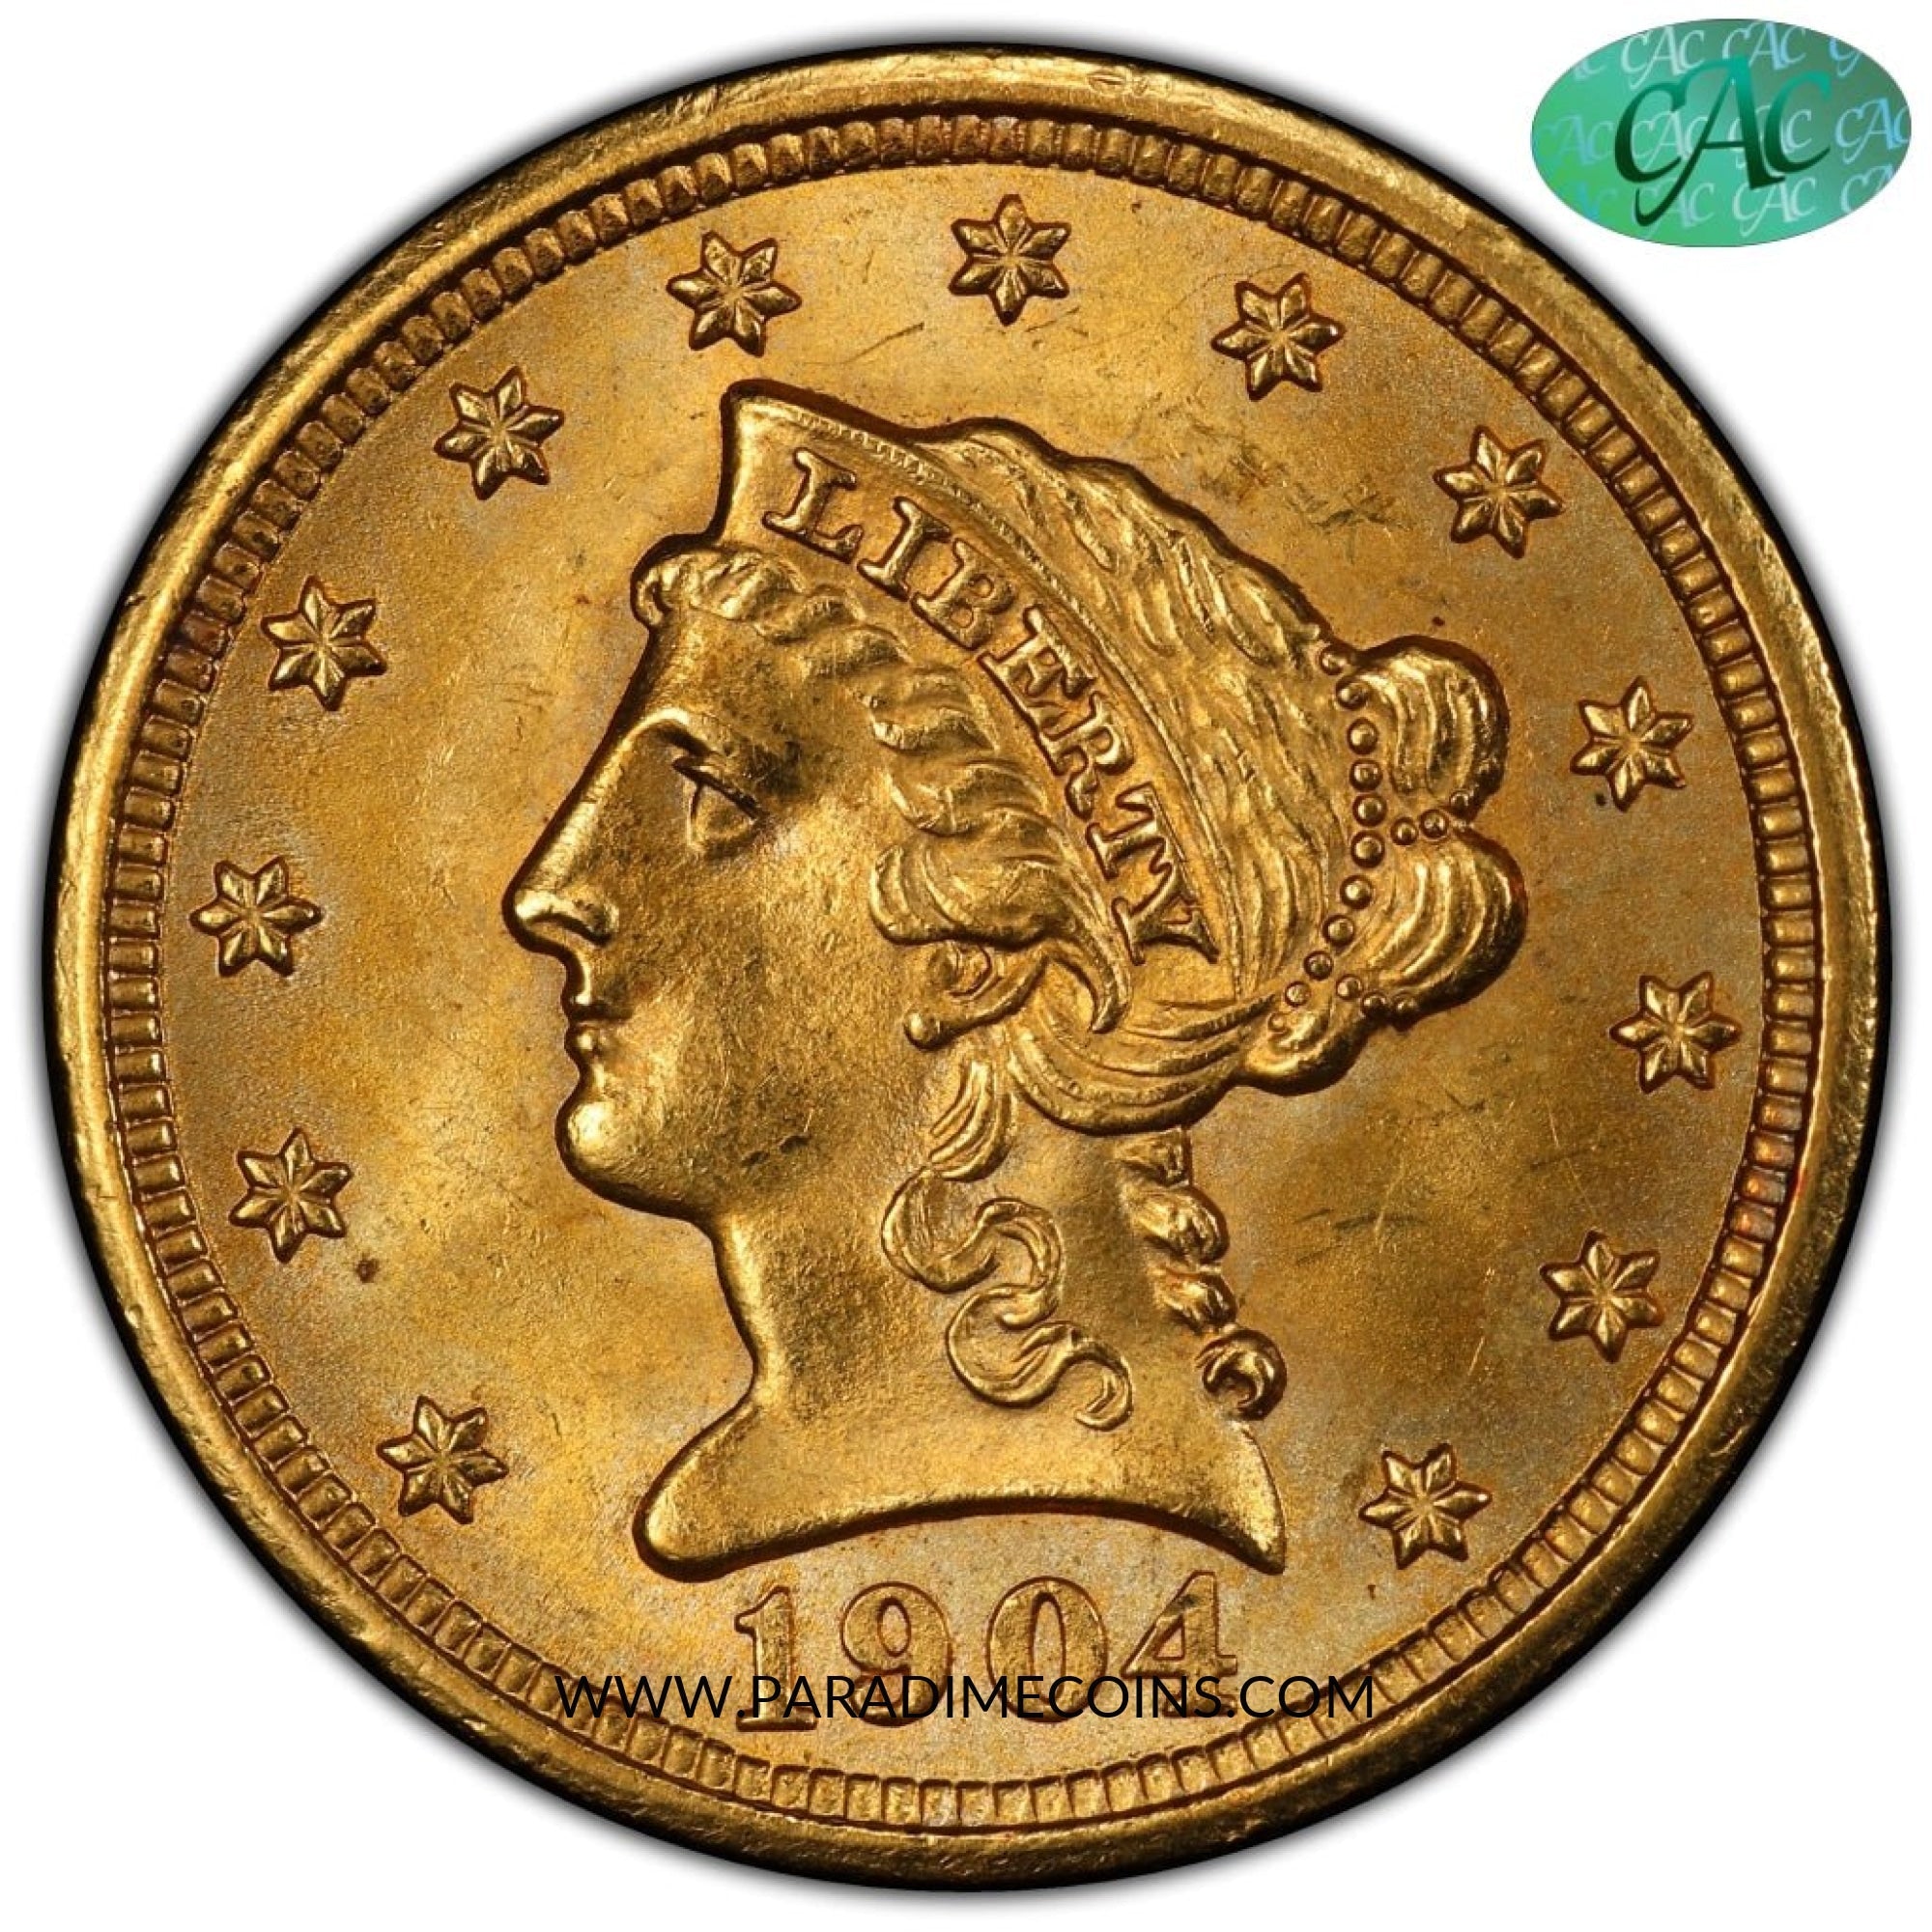 1904 $2.5 MS65+ PCGS CAC - Paradime Coins | PCGS NGC CACG CAC Rare US Numismatic Coins For Sale